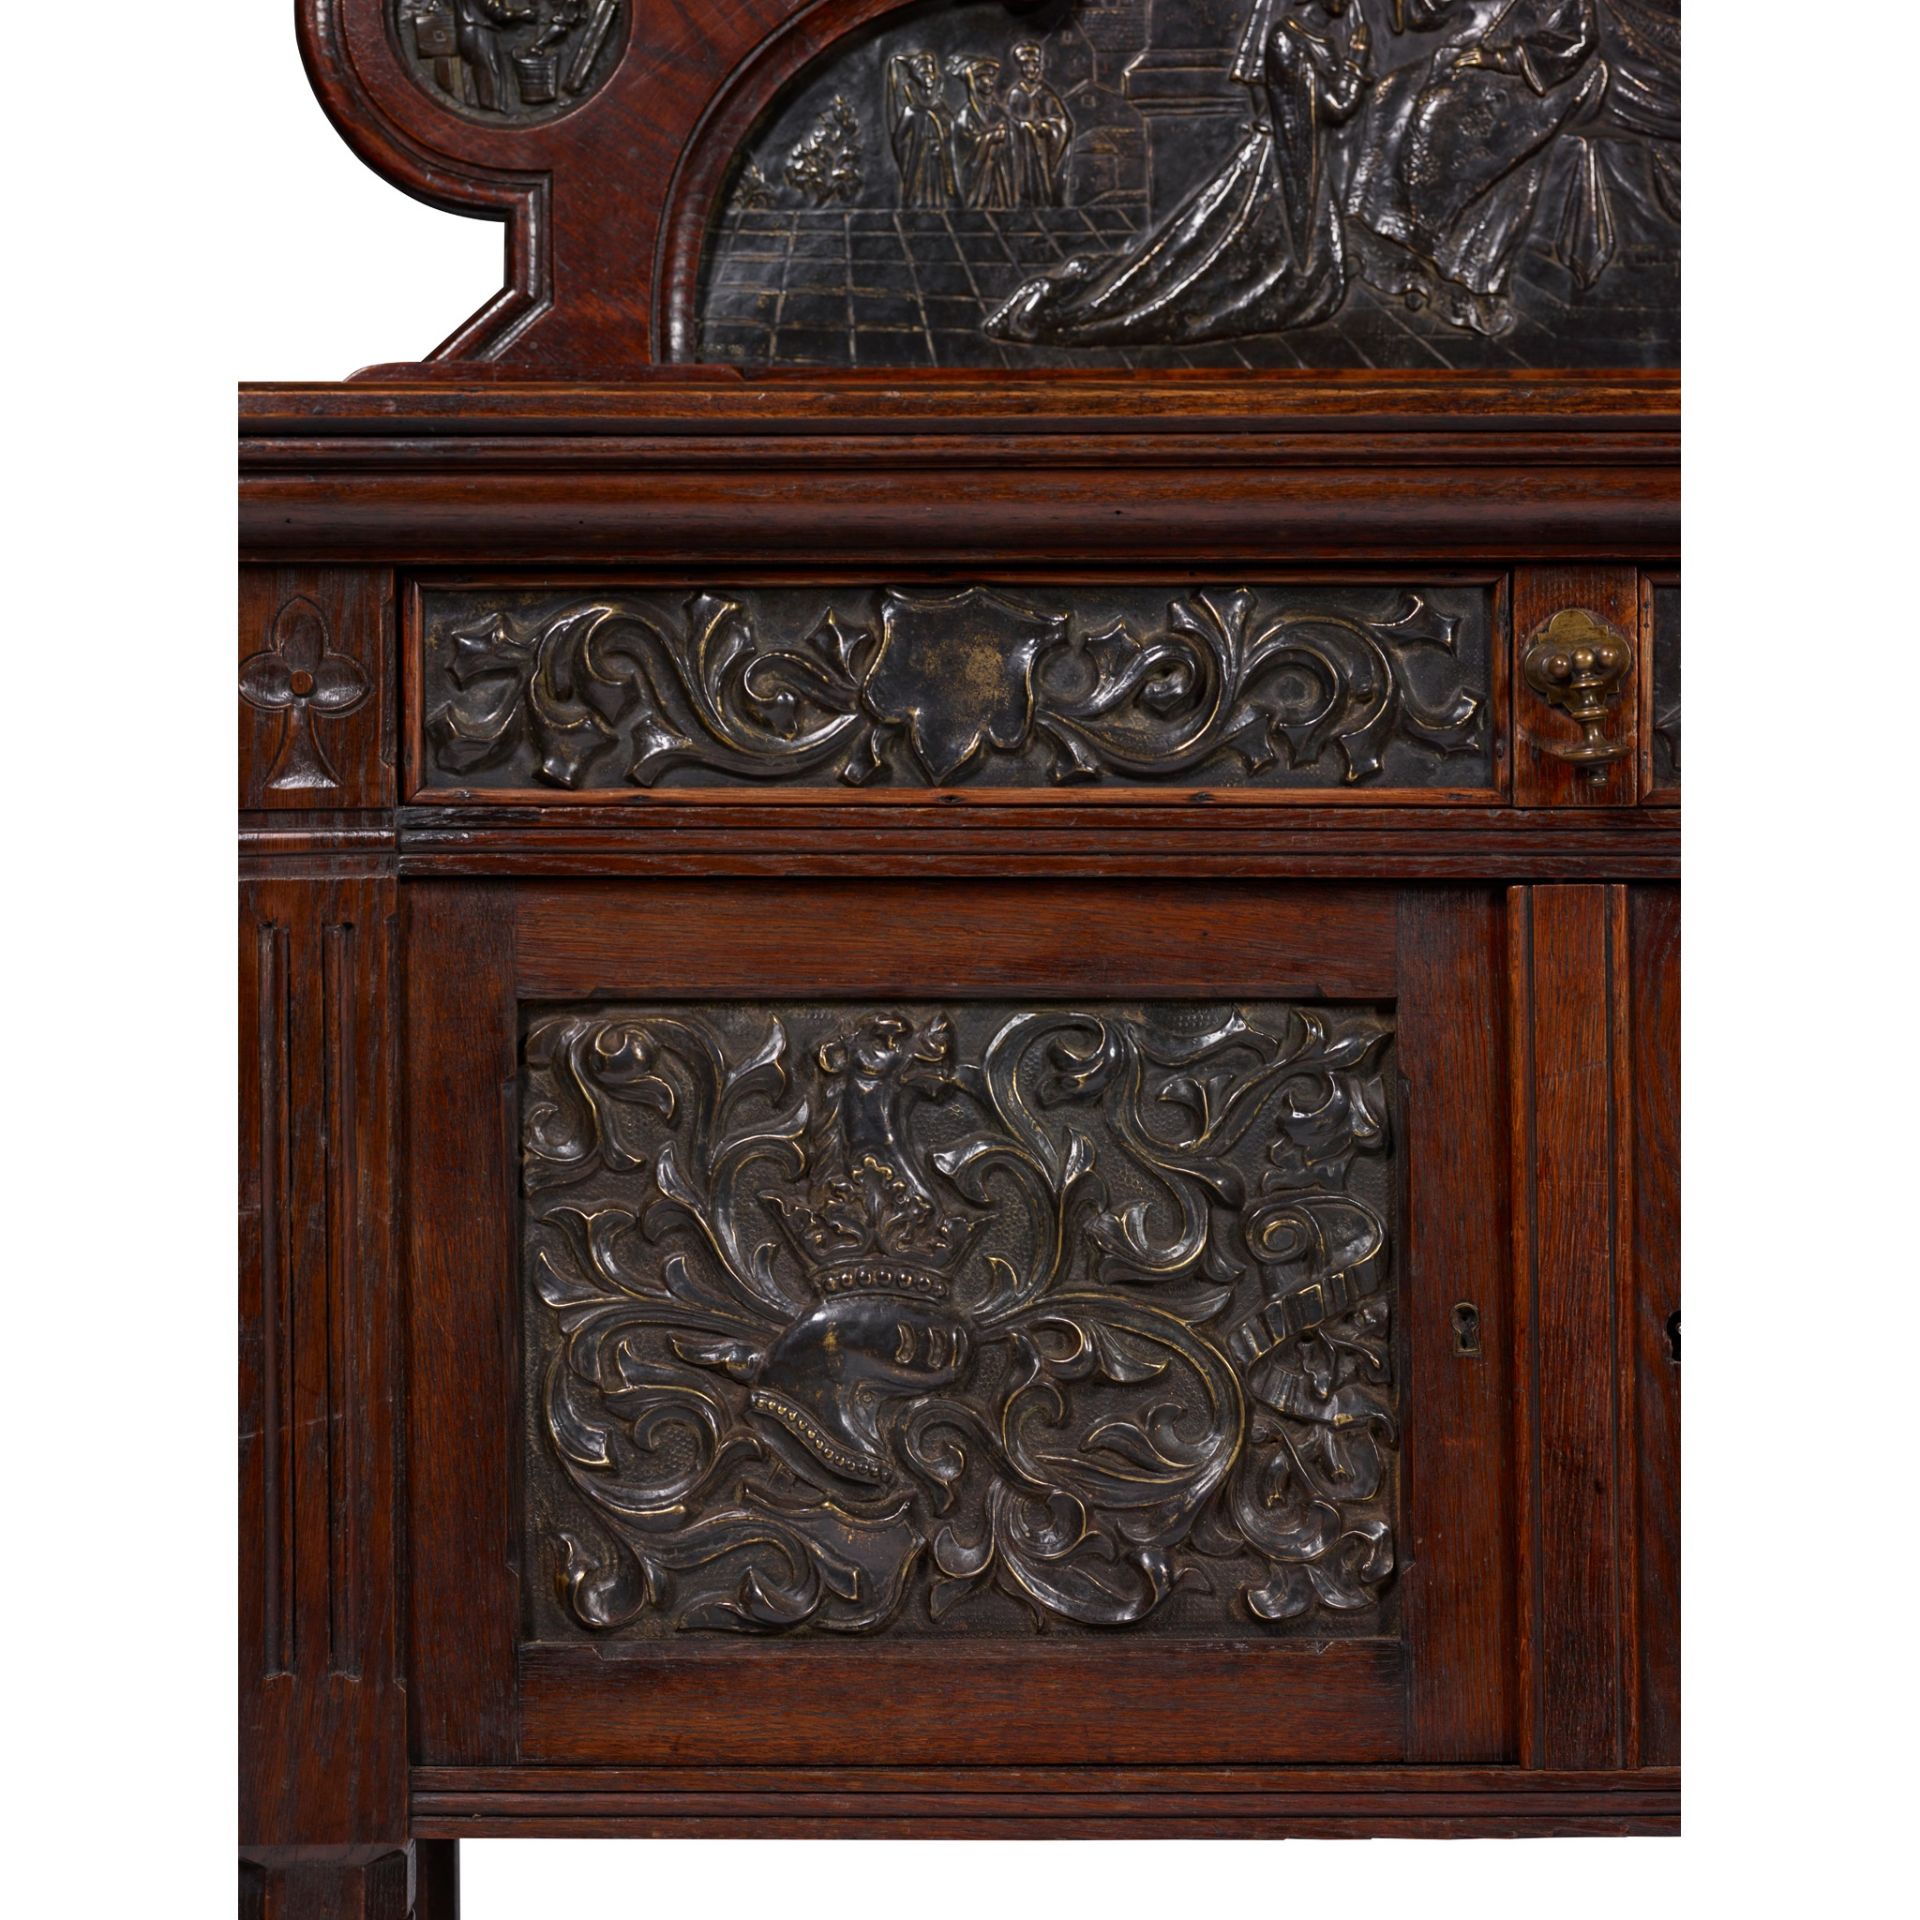 COX & SONS, LONDON (ATTRIBUTED MAKER) GOTHIC REVIVAL SIDE CABINET, CIRCA 1870 - Image 4 of 10